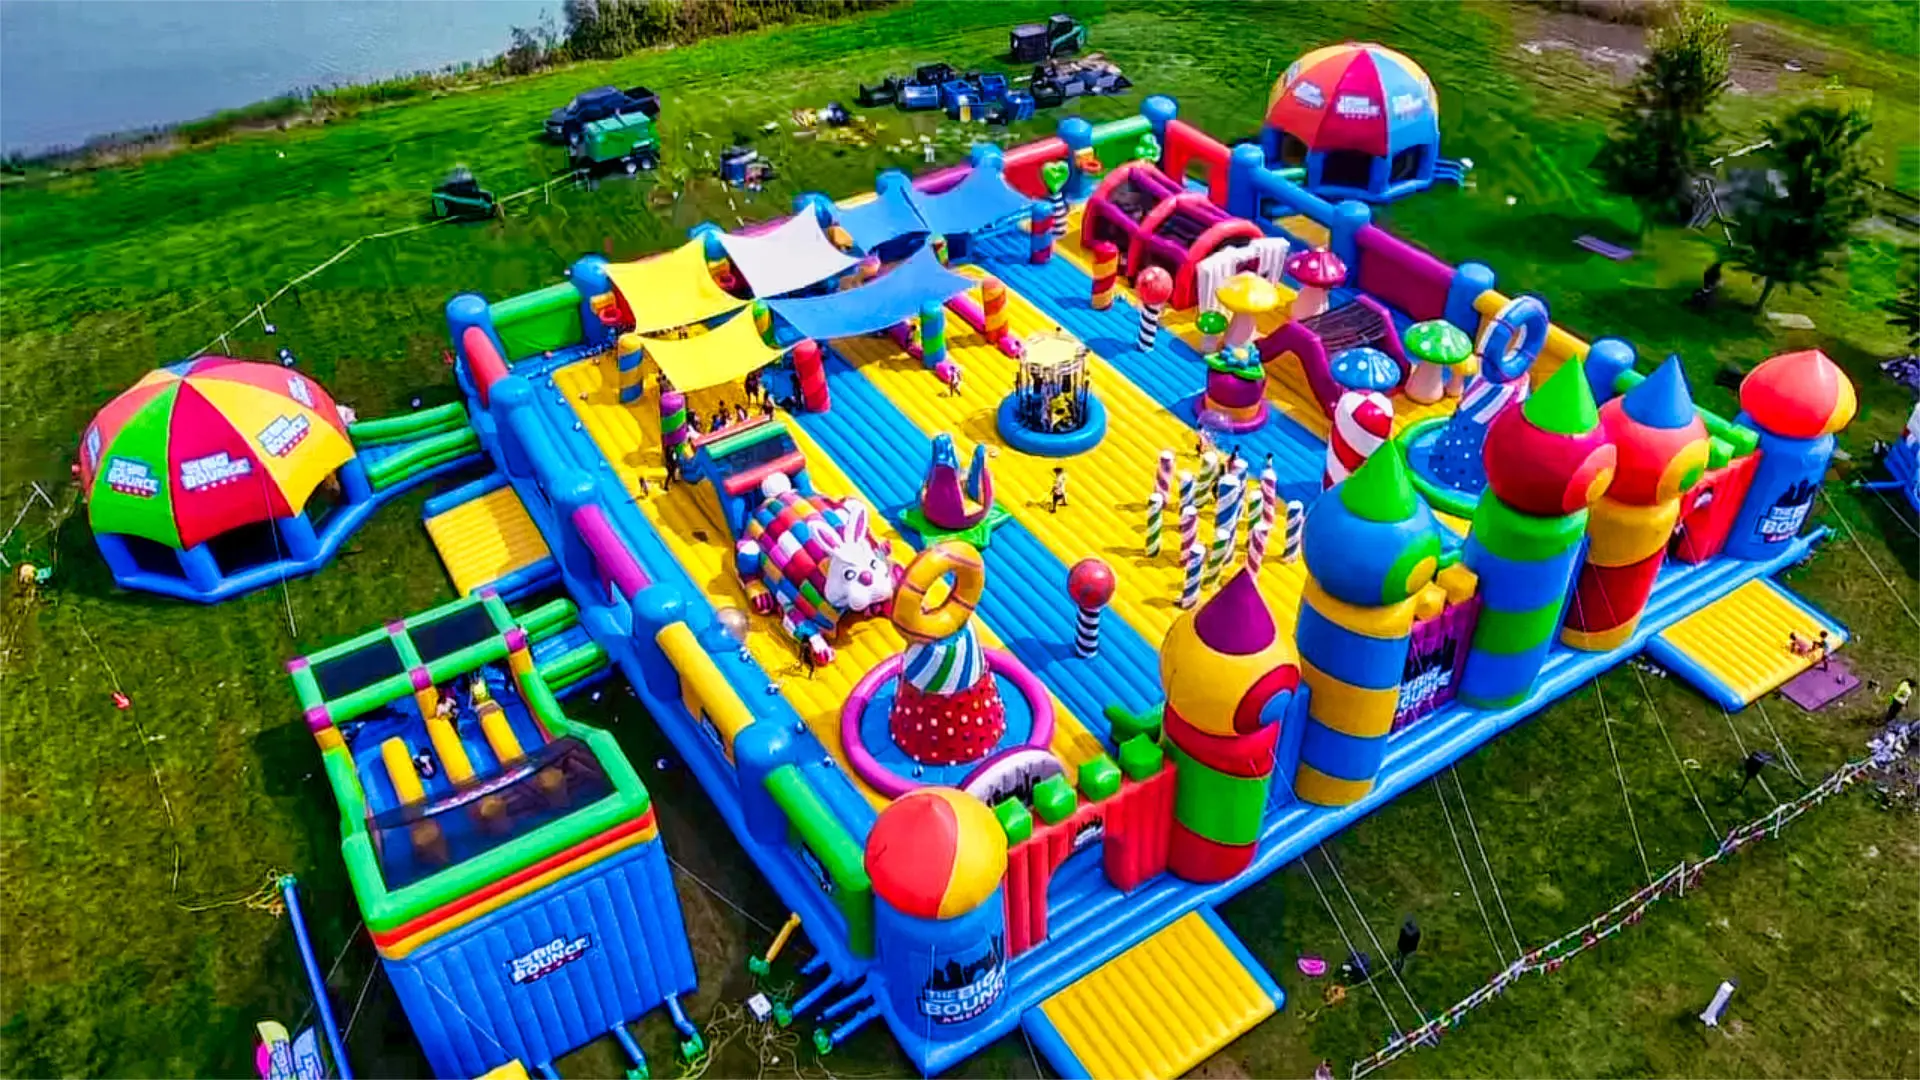 Link to: The Big Bounce America, Gwinnett County Fairgrounds GA Apr 27 - May 5